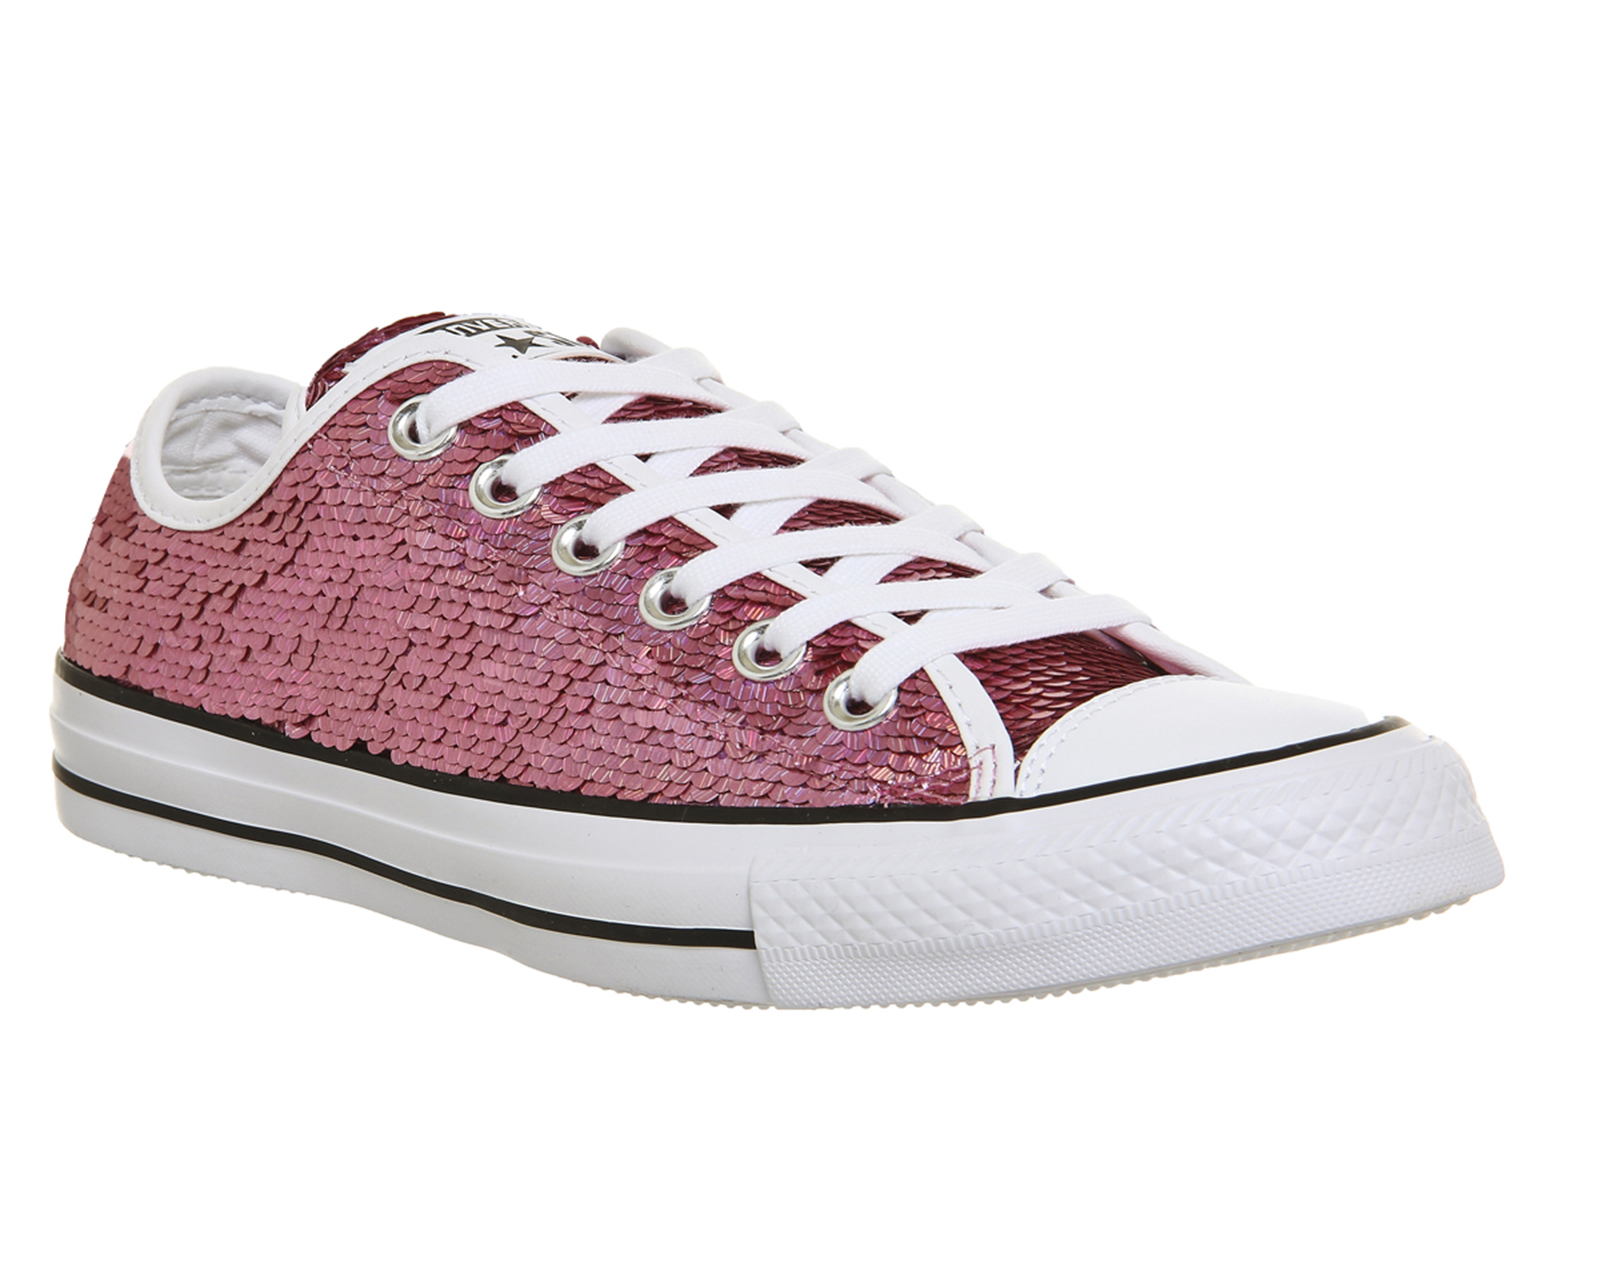 ConverseConverse All Star LowPassion Pink Sequin